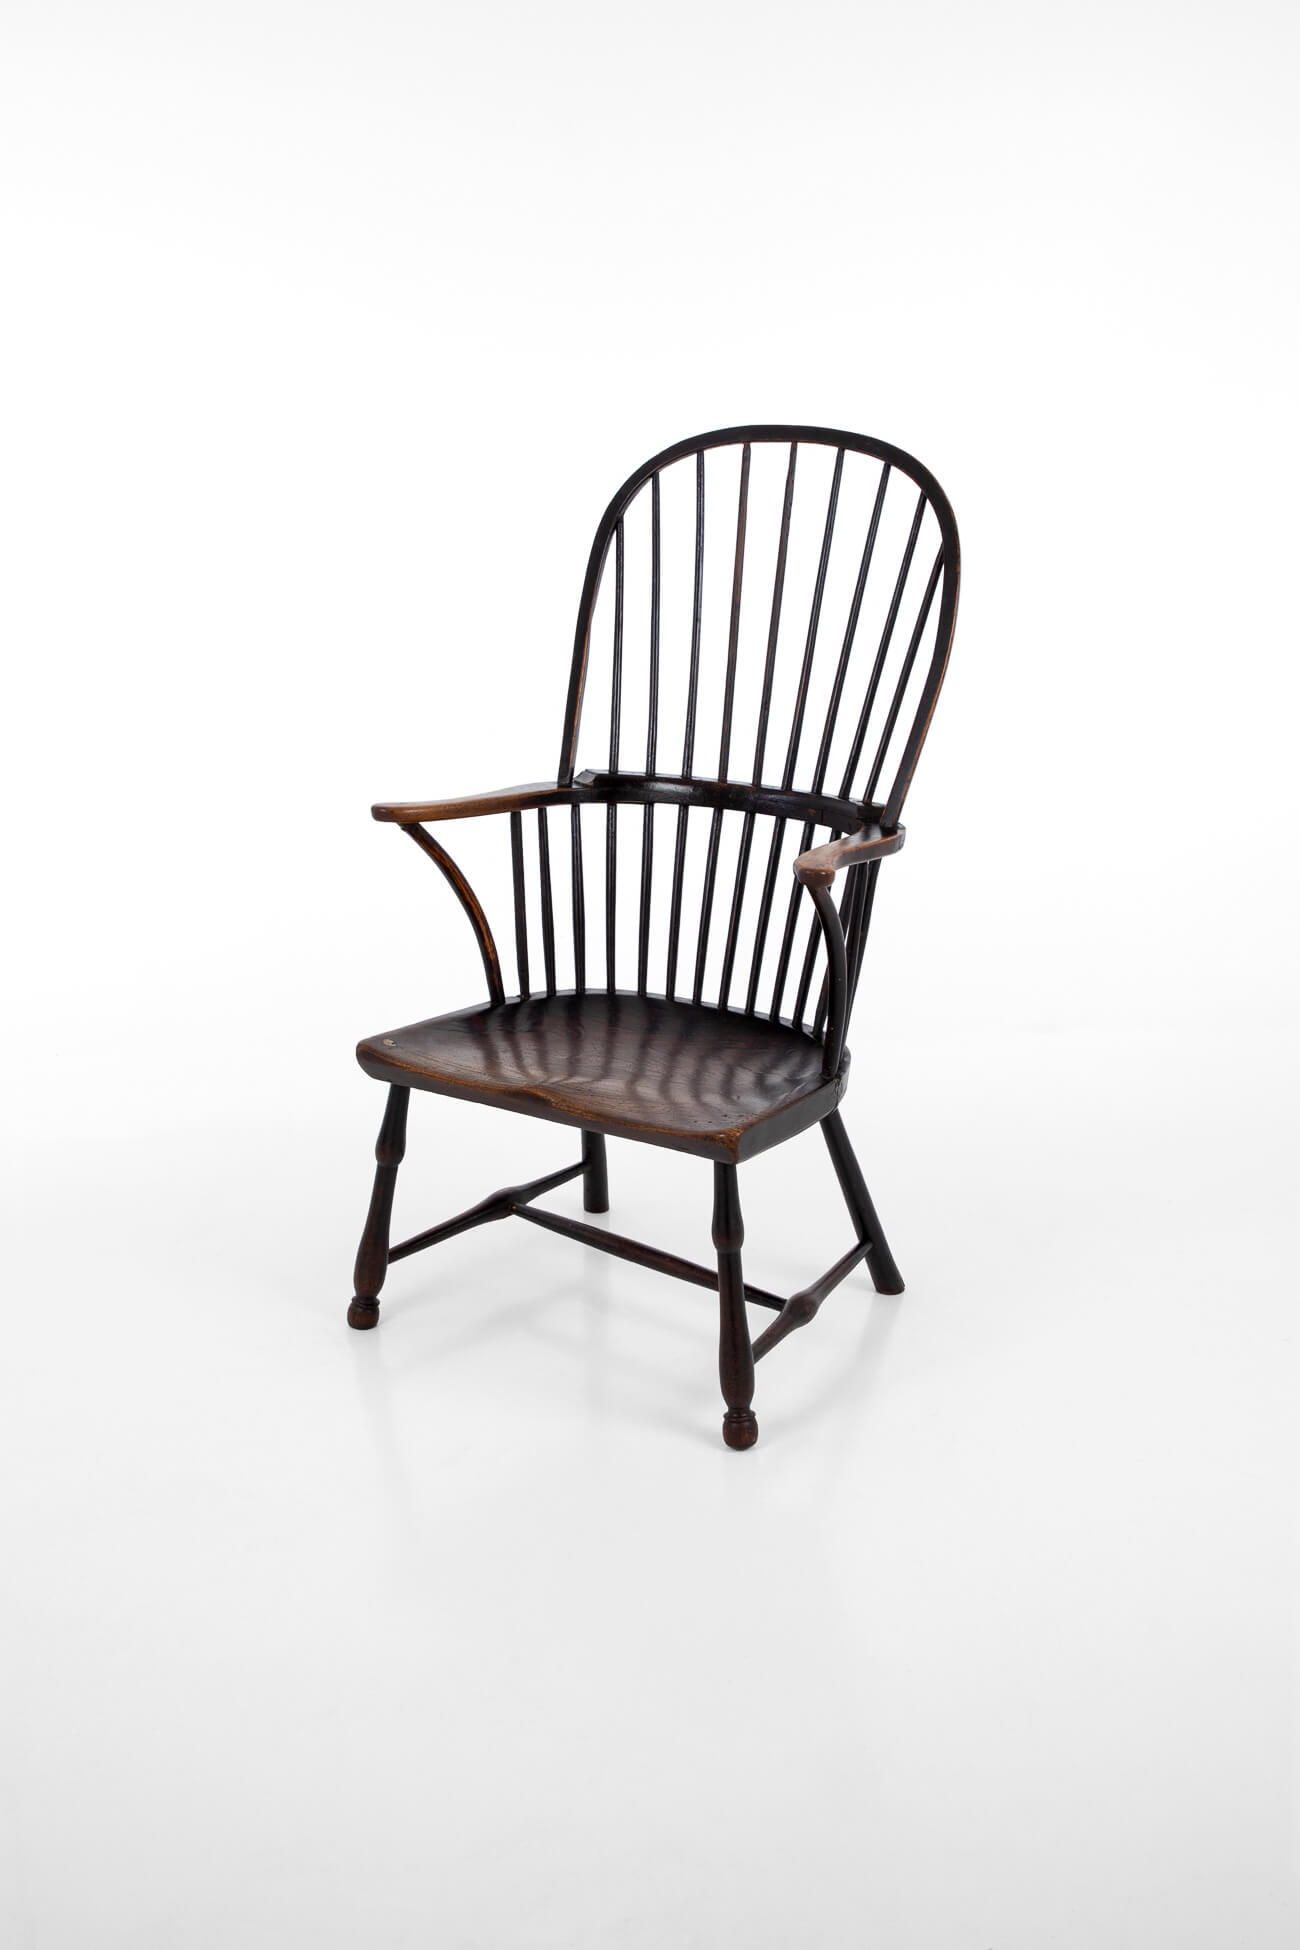 18th century West country Windsor stick back chair